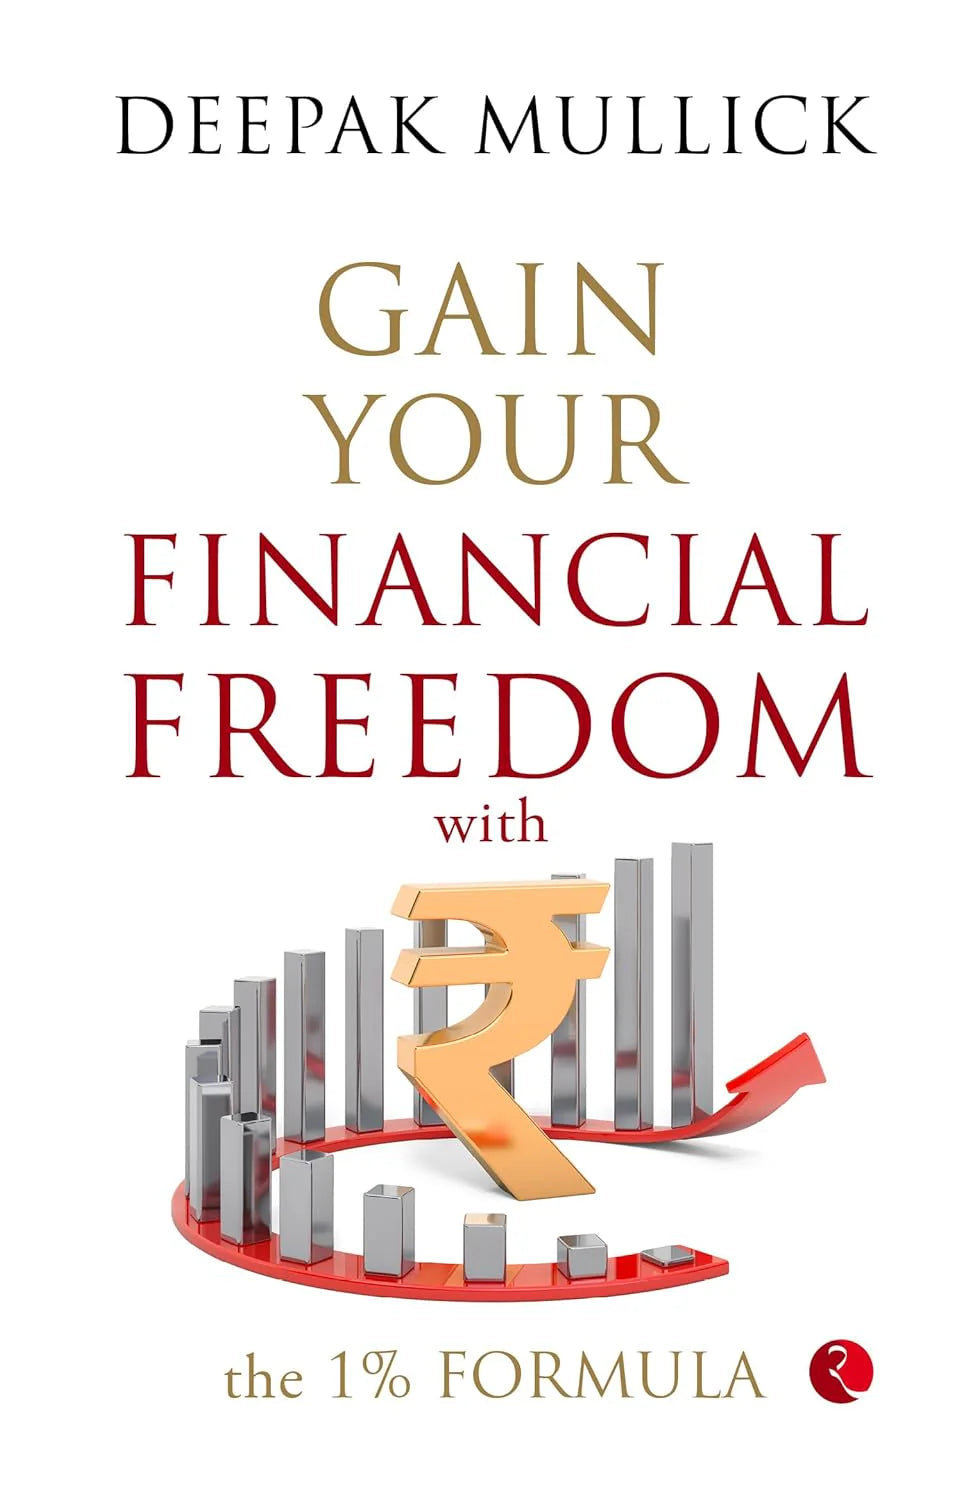 Gain Your Financial Freedom With The 1% Formula by Deepak Mullick